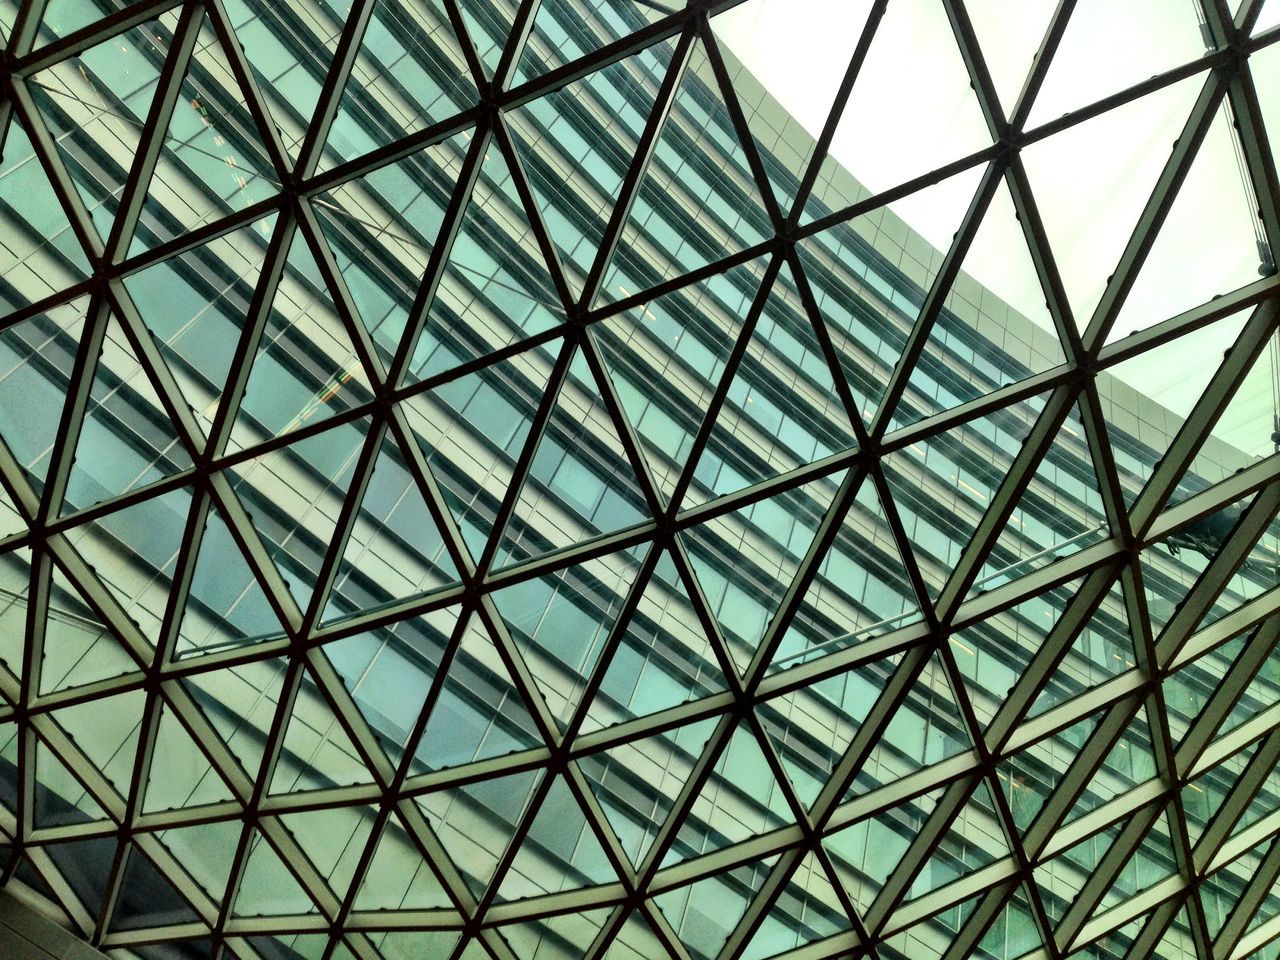 architecture, built structure, glass - material, low angle view, pattern, full frame, indoors, backgrounds, architectural feature, modern, design, ceiling, geometric shape, transparent, grid, day, no people, skylight, sky, building exterior